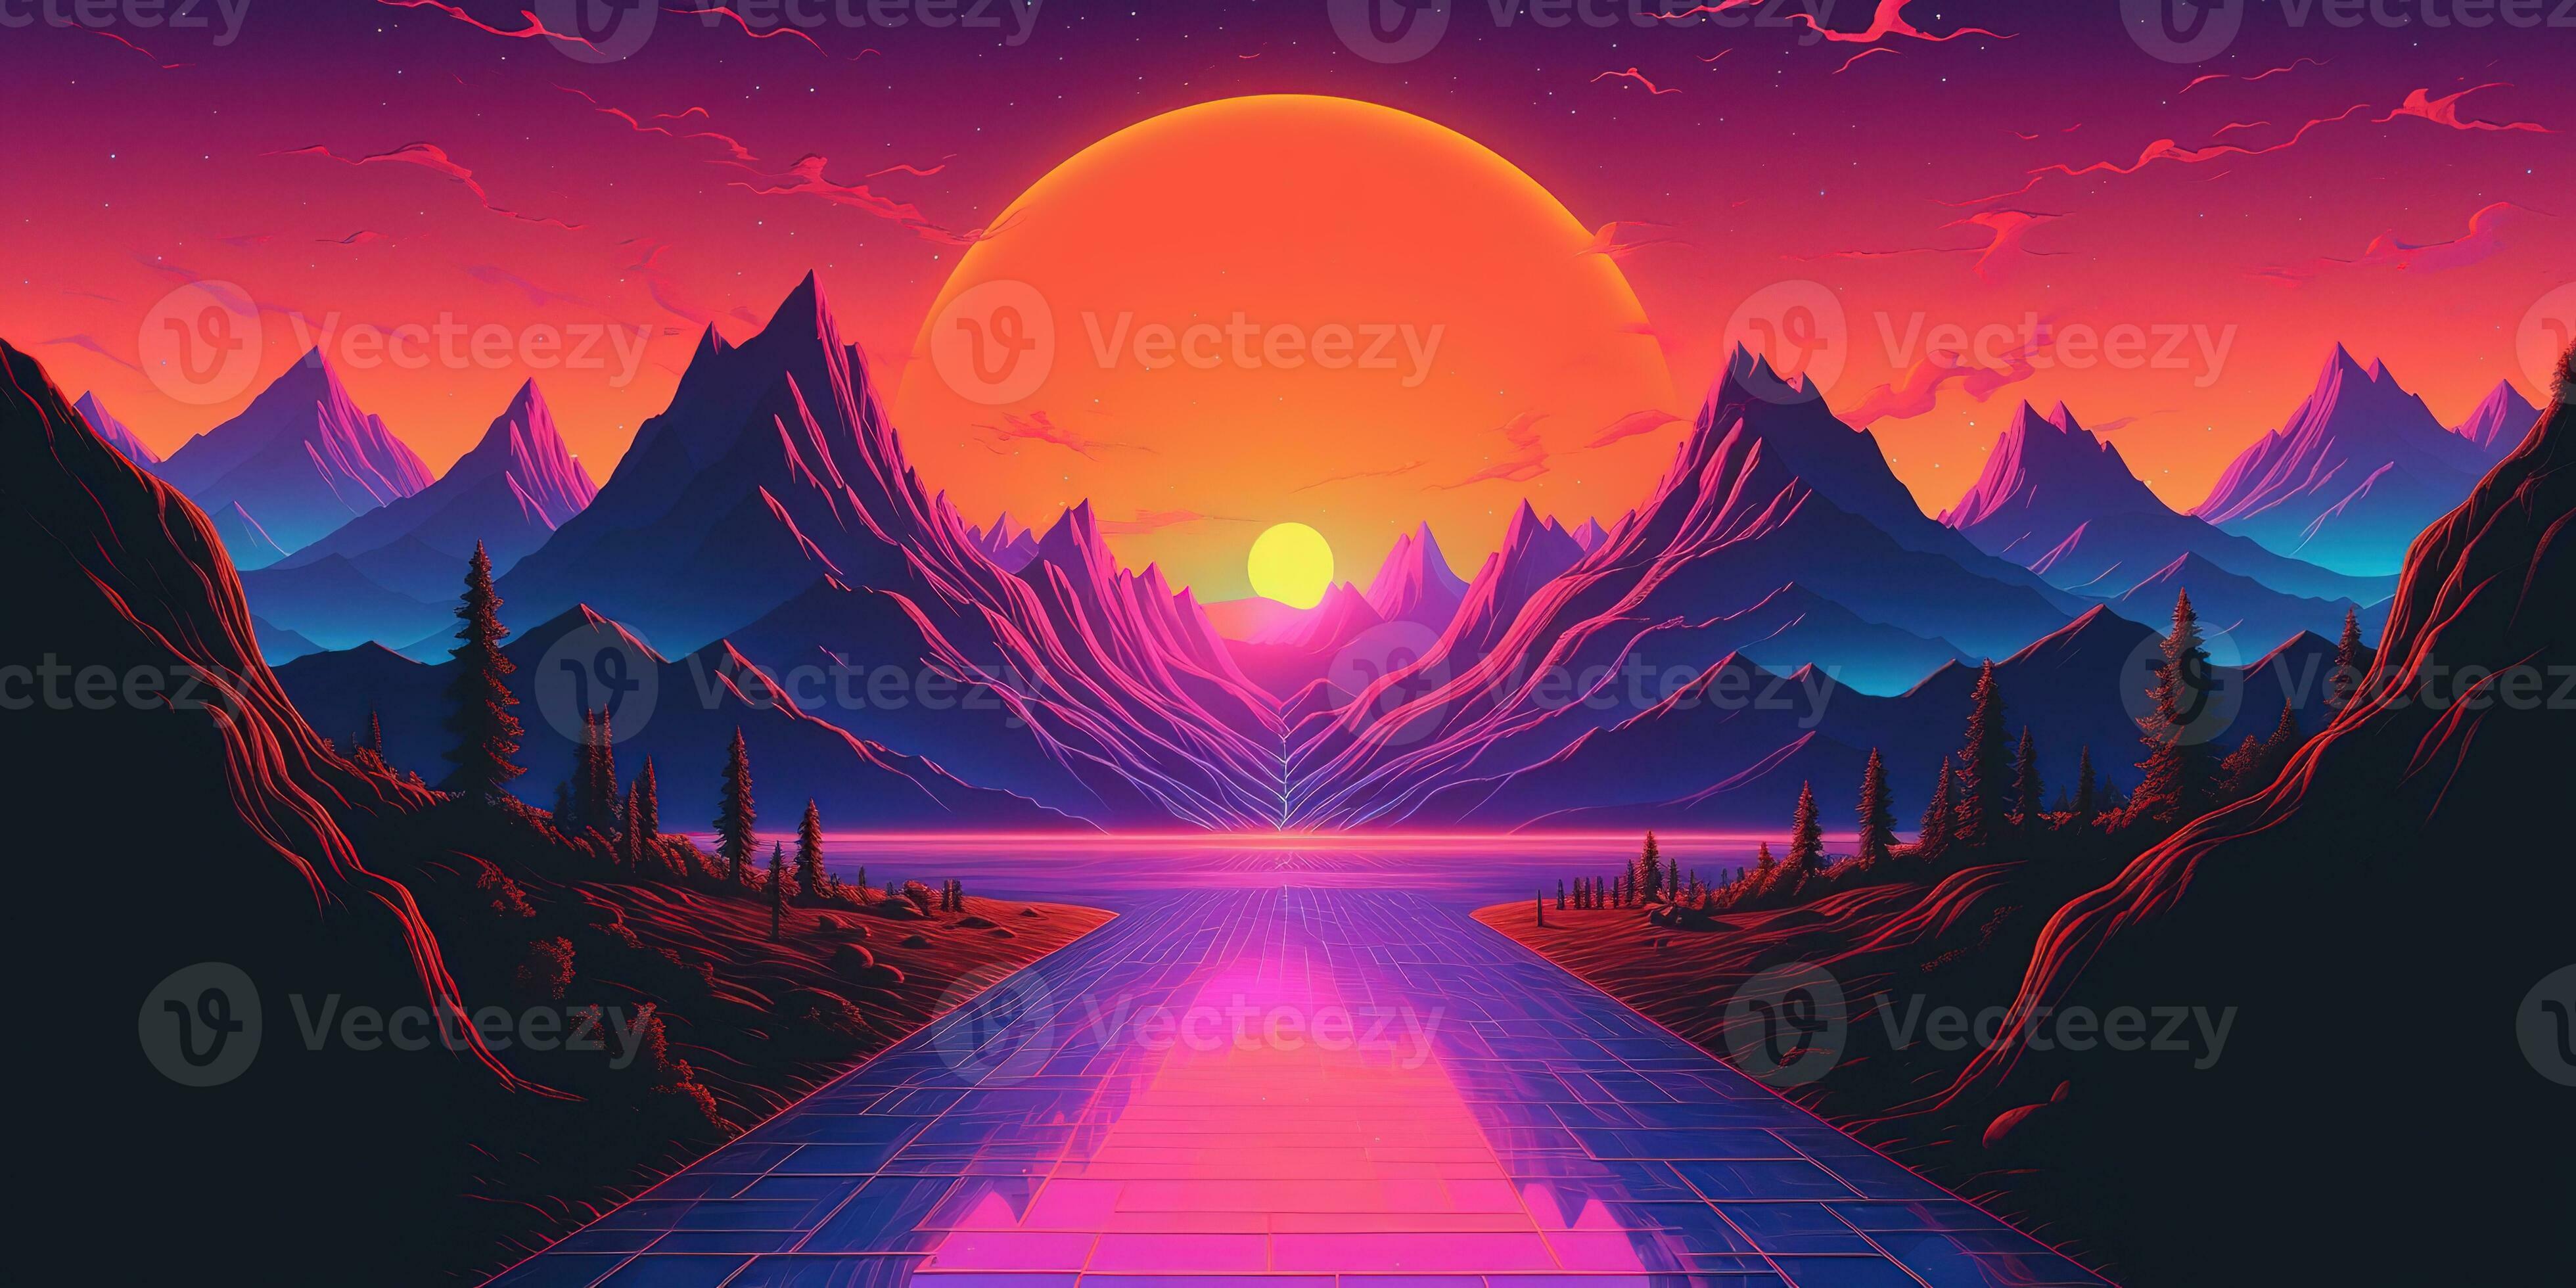 Digital illustration of a sunset in a futuristic landscape - Synthwave